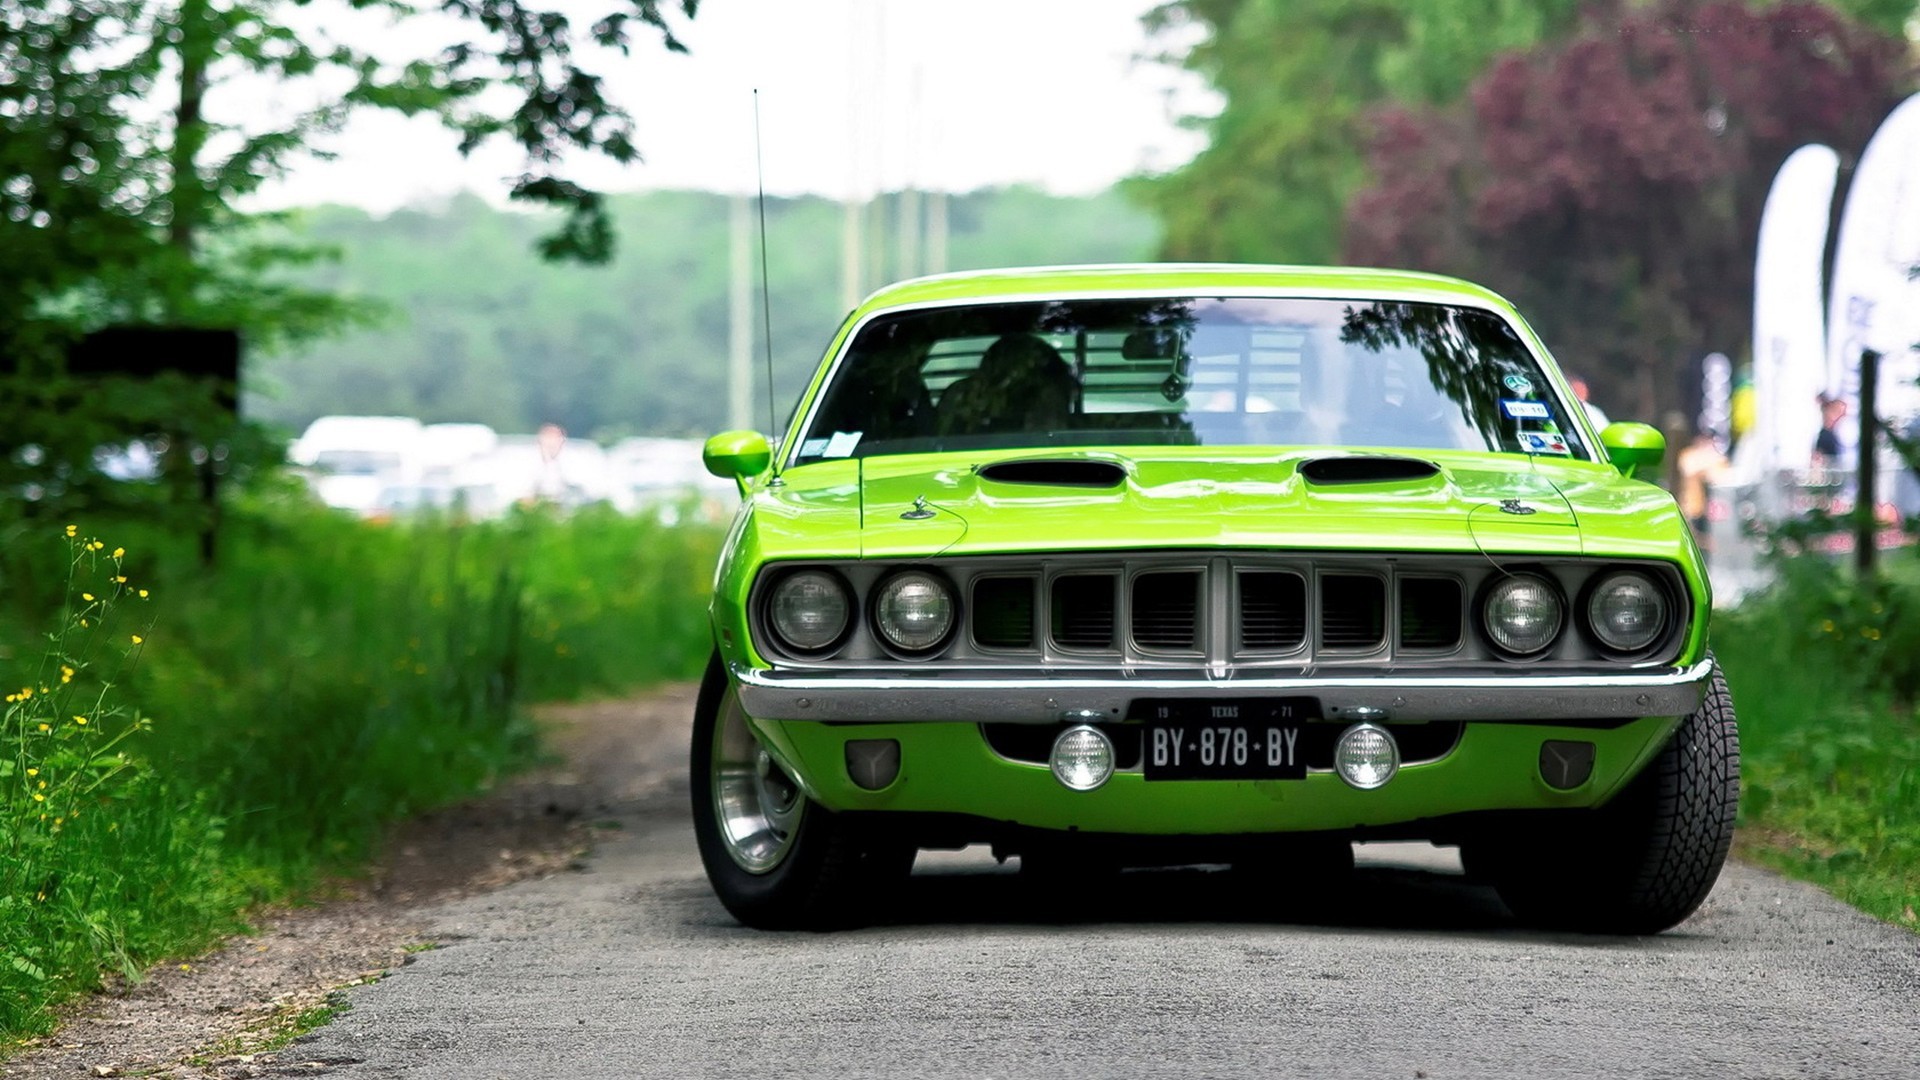 Green Cars Vehicles Barracuda Plymouth Wallpaper Allwallpaper In